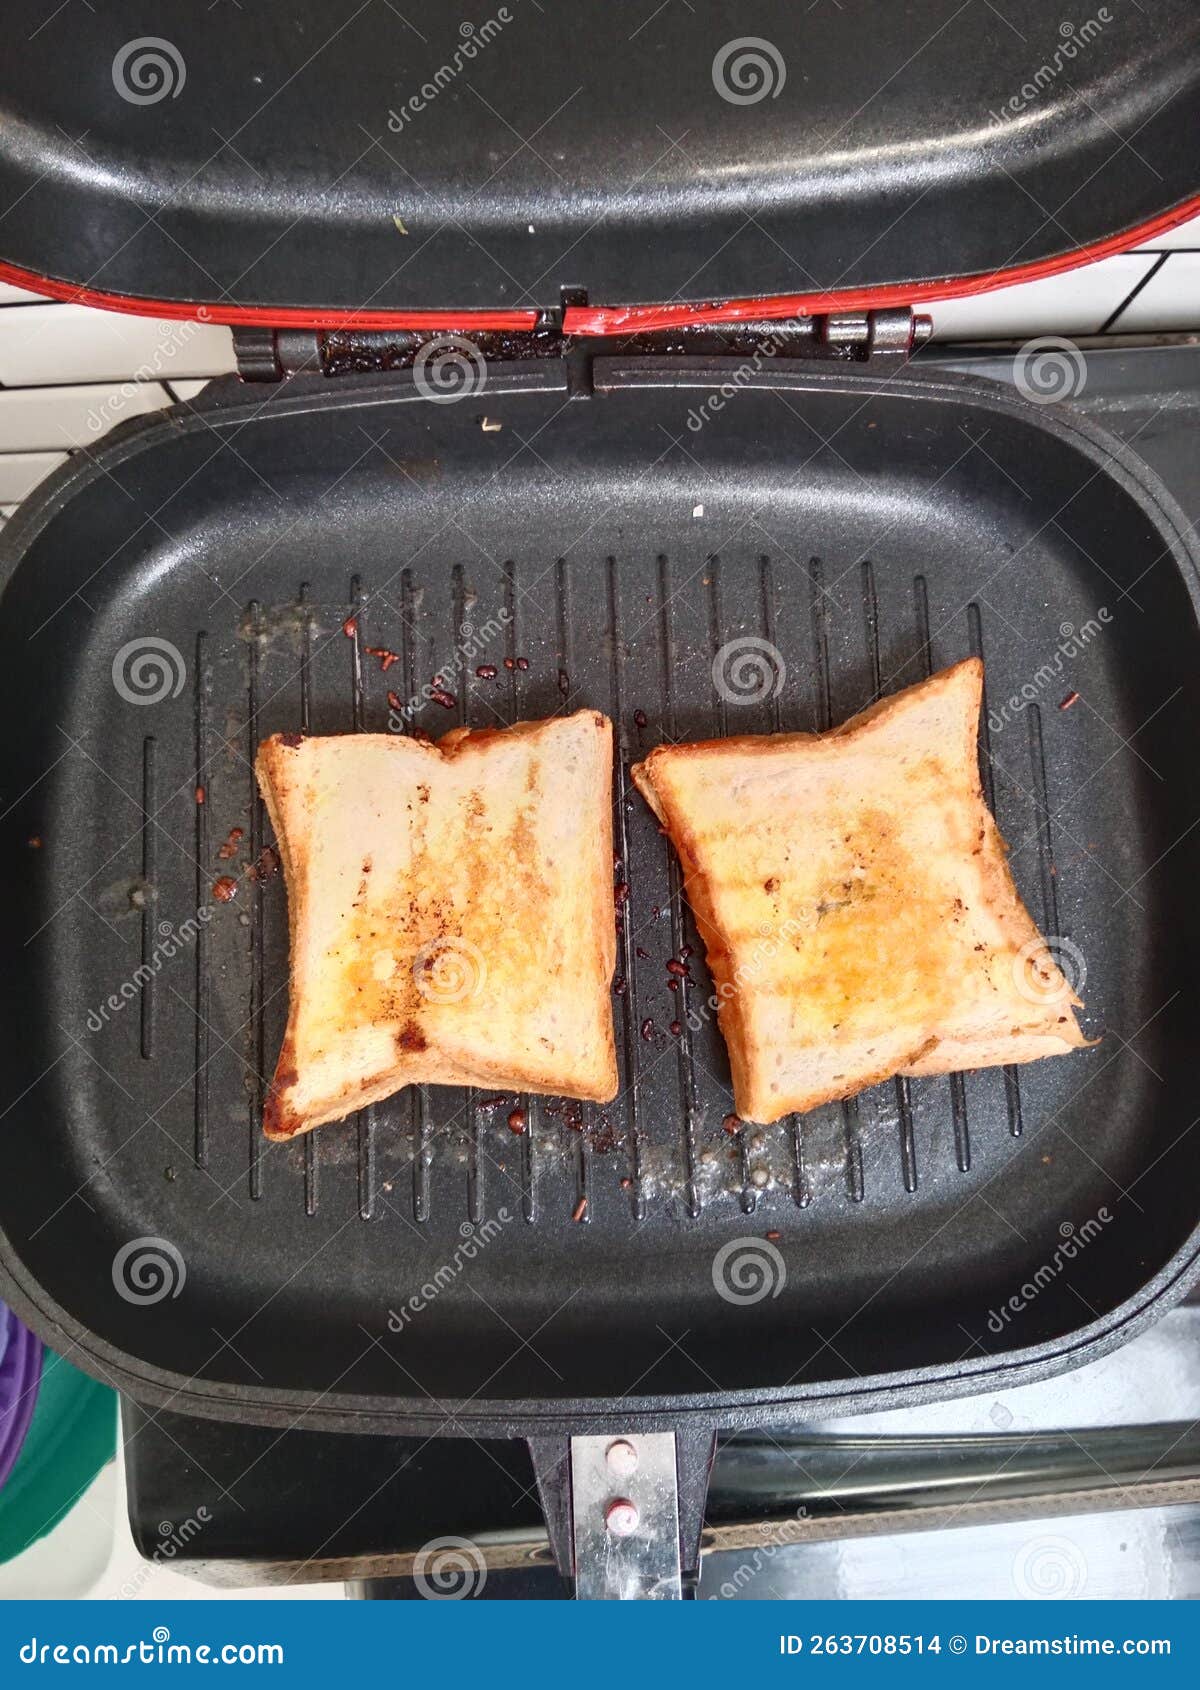 brown seres toast on a black, hot grill